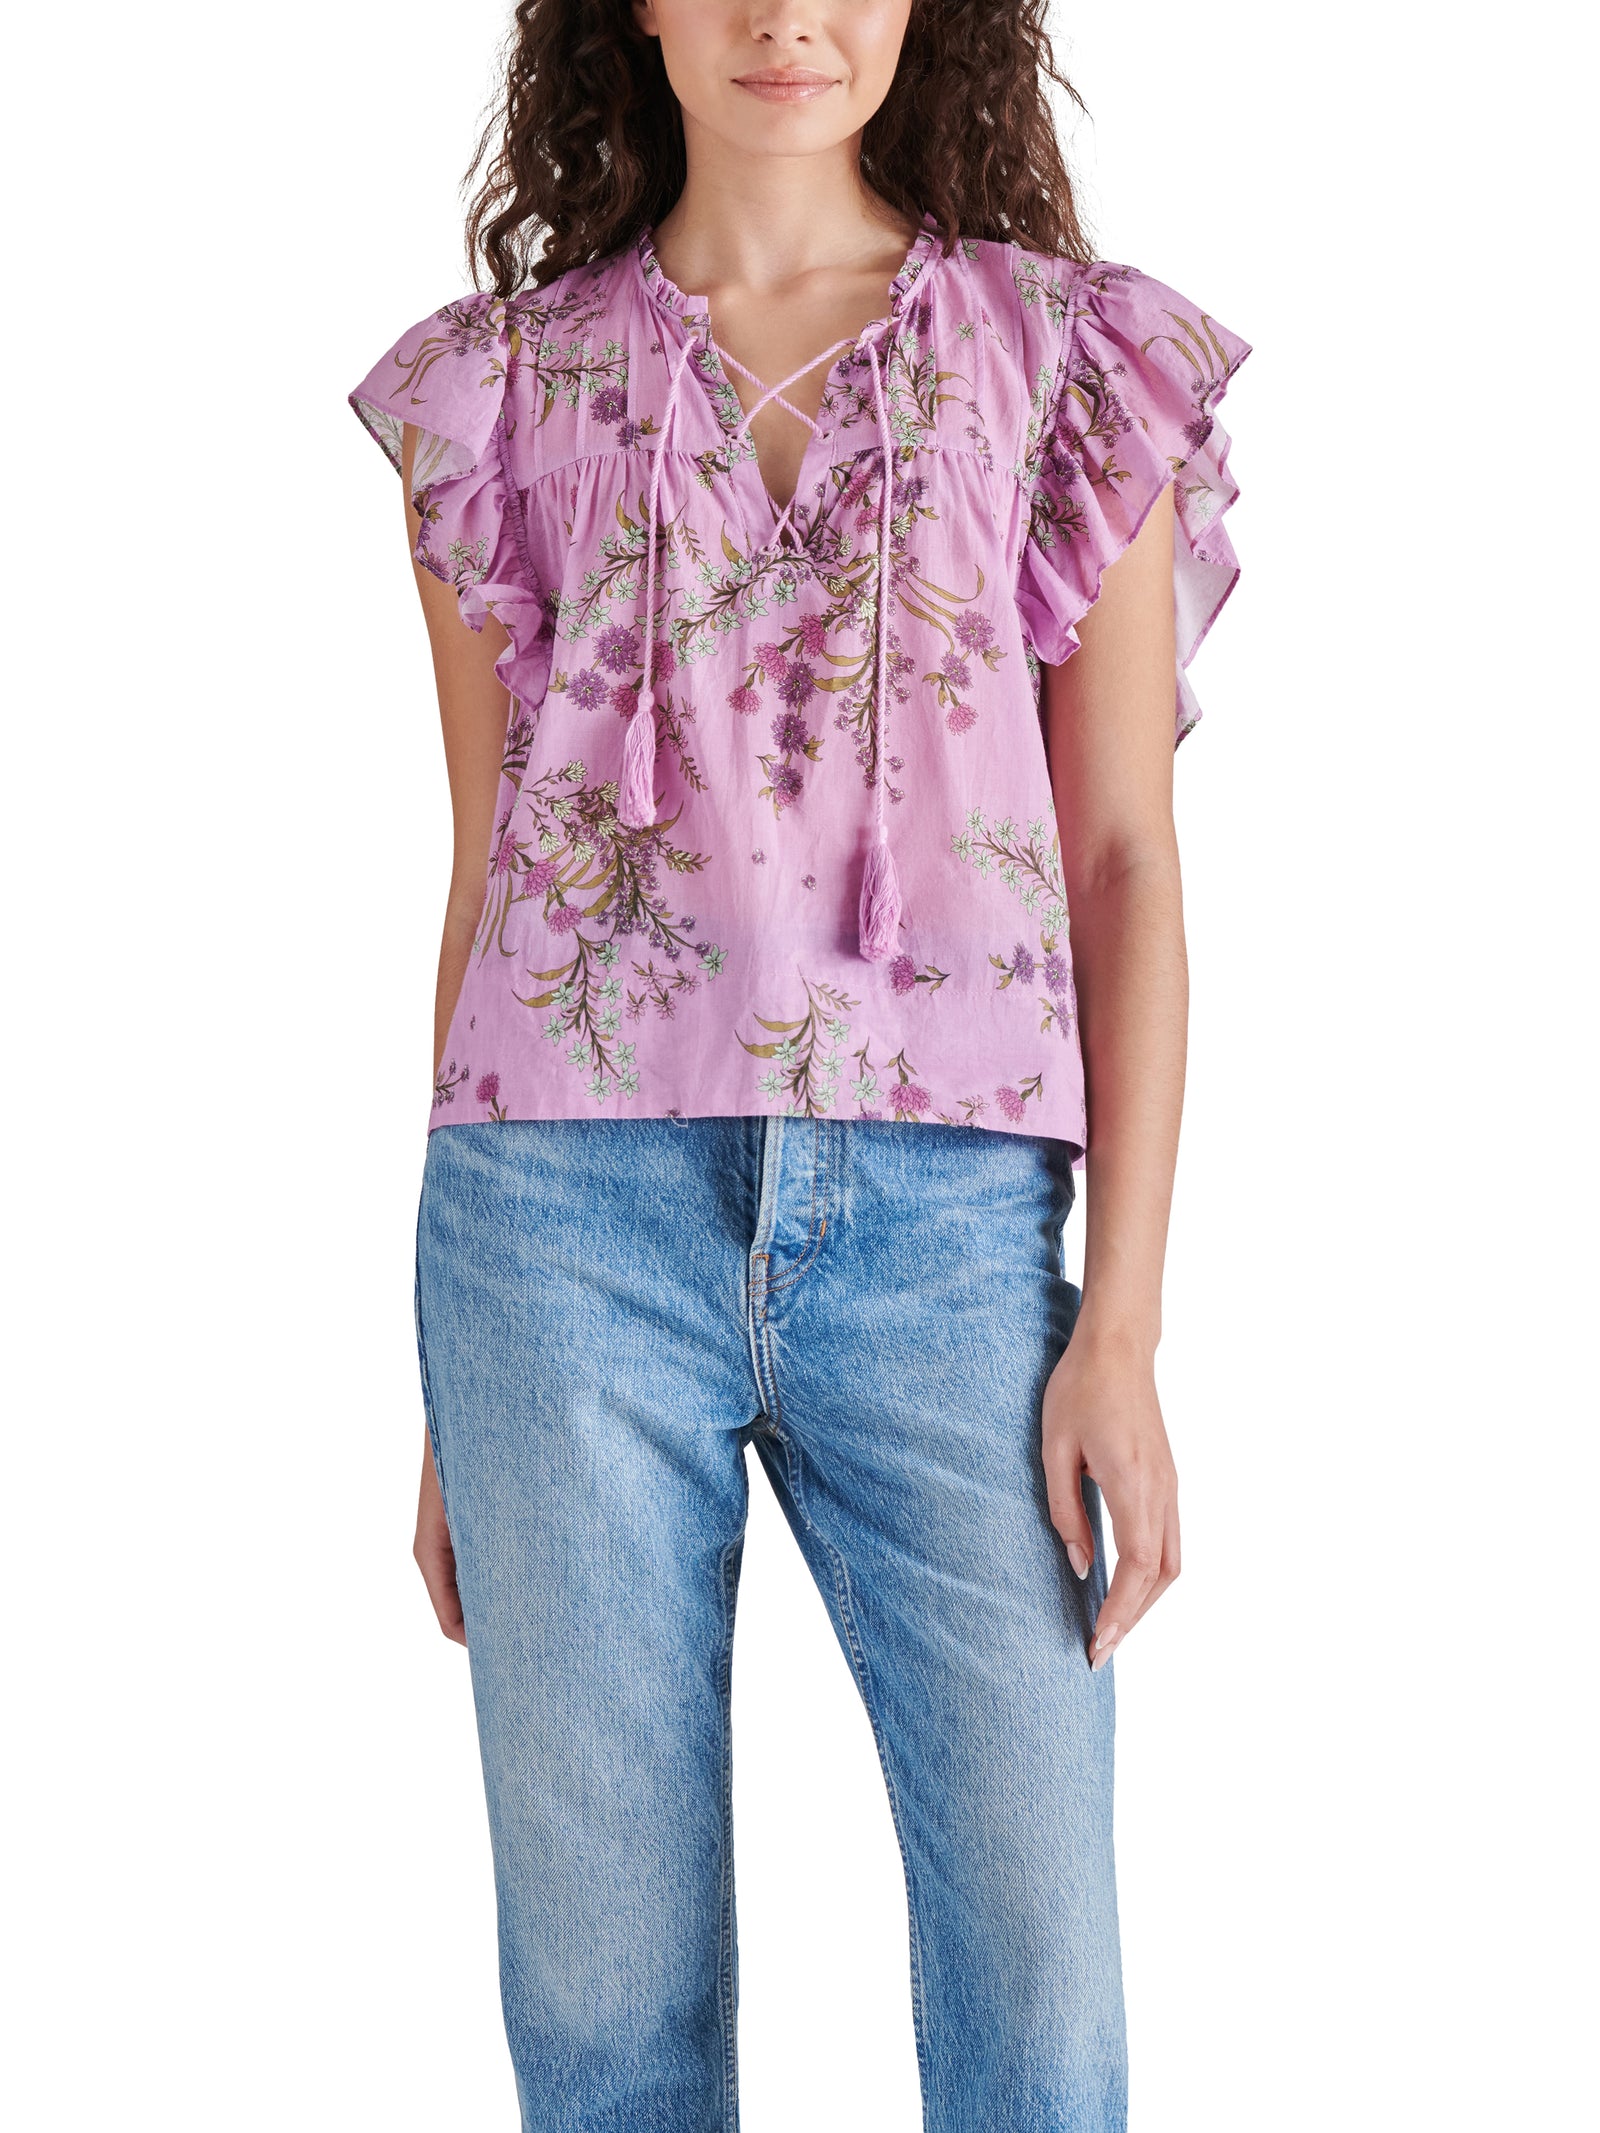 ADORINGLY YOURS BUSTIER TOP IN PINK   - Indigeaux Denim Bar &  Boutique